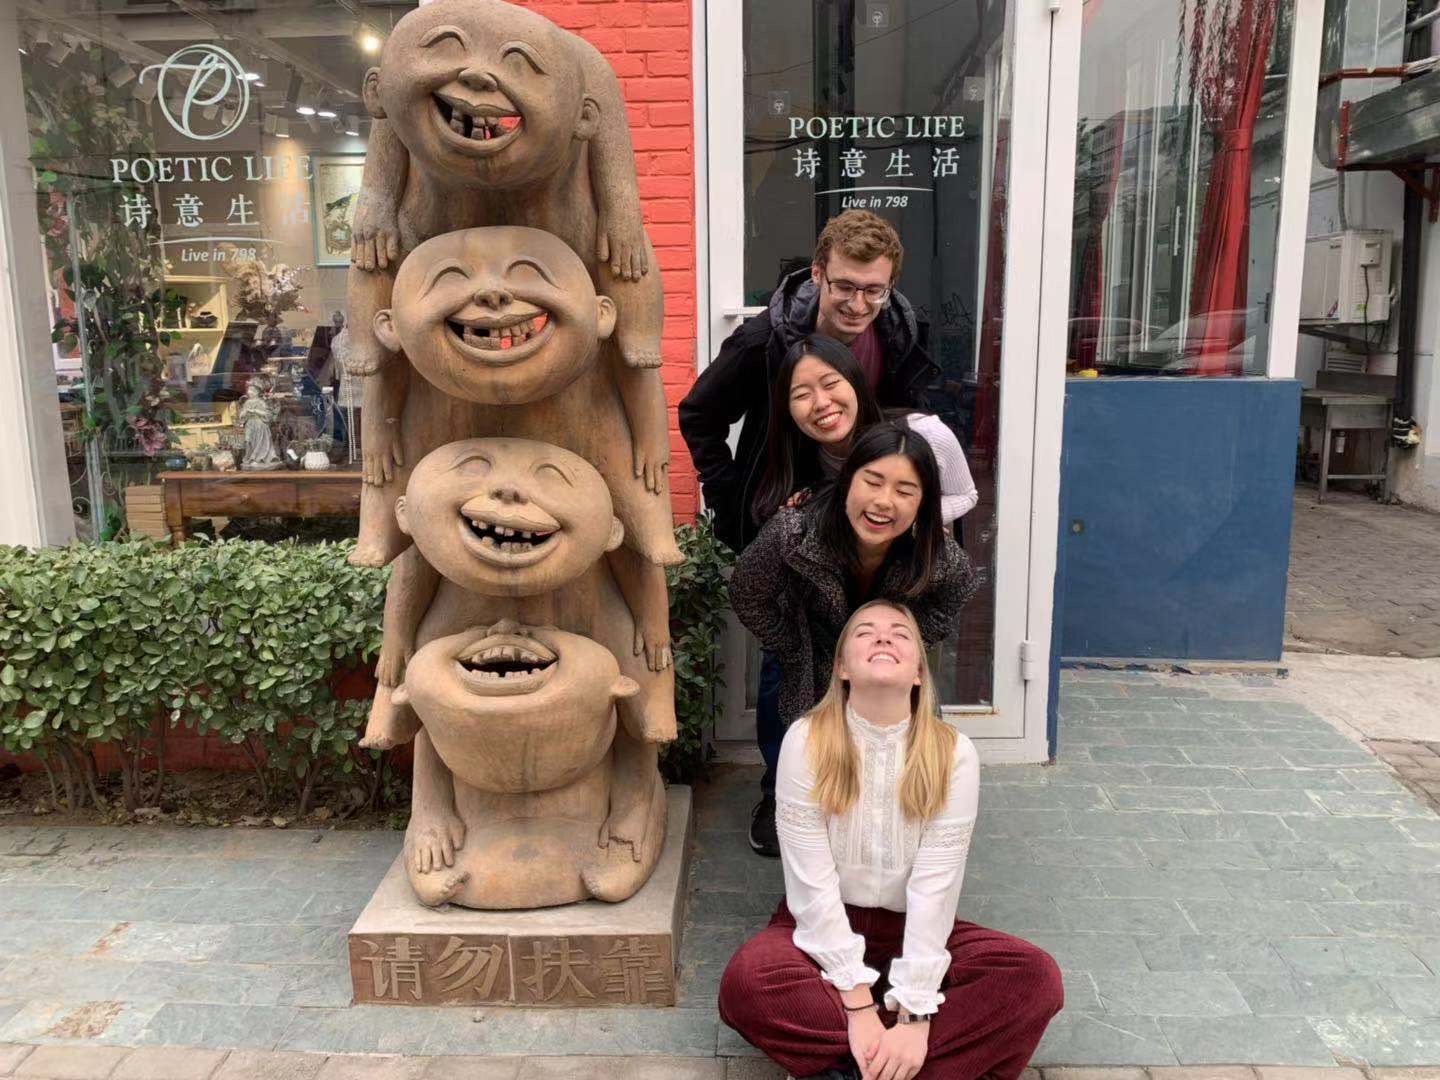 4 students posing with a sculpture of faces.